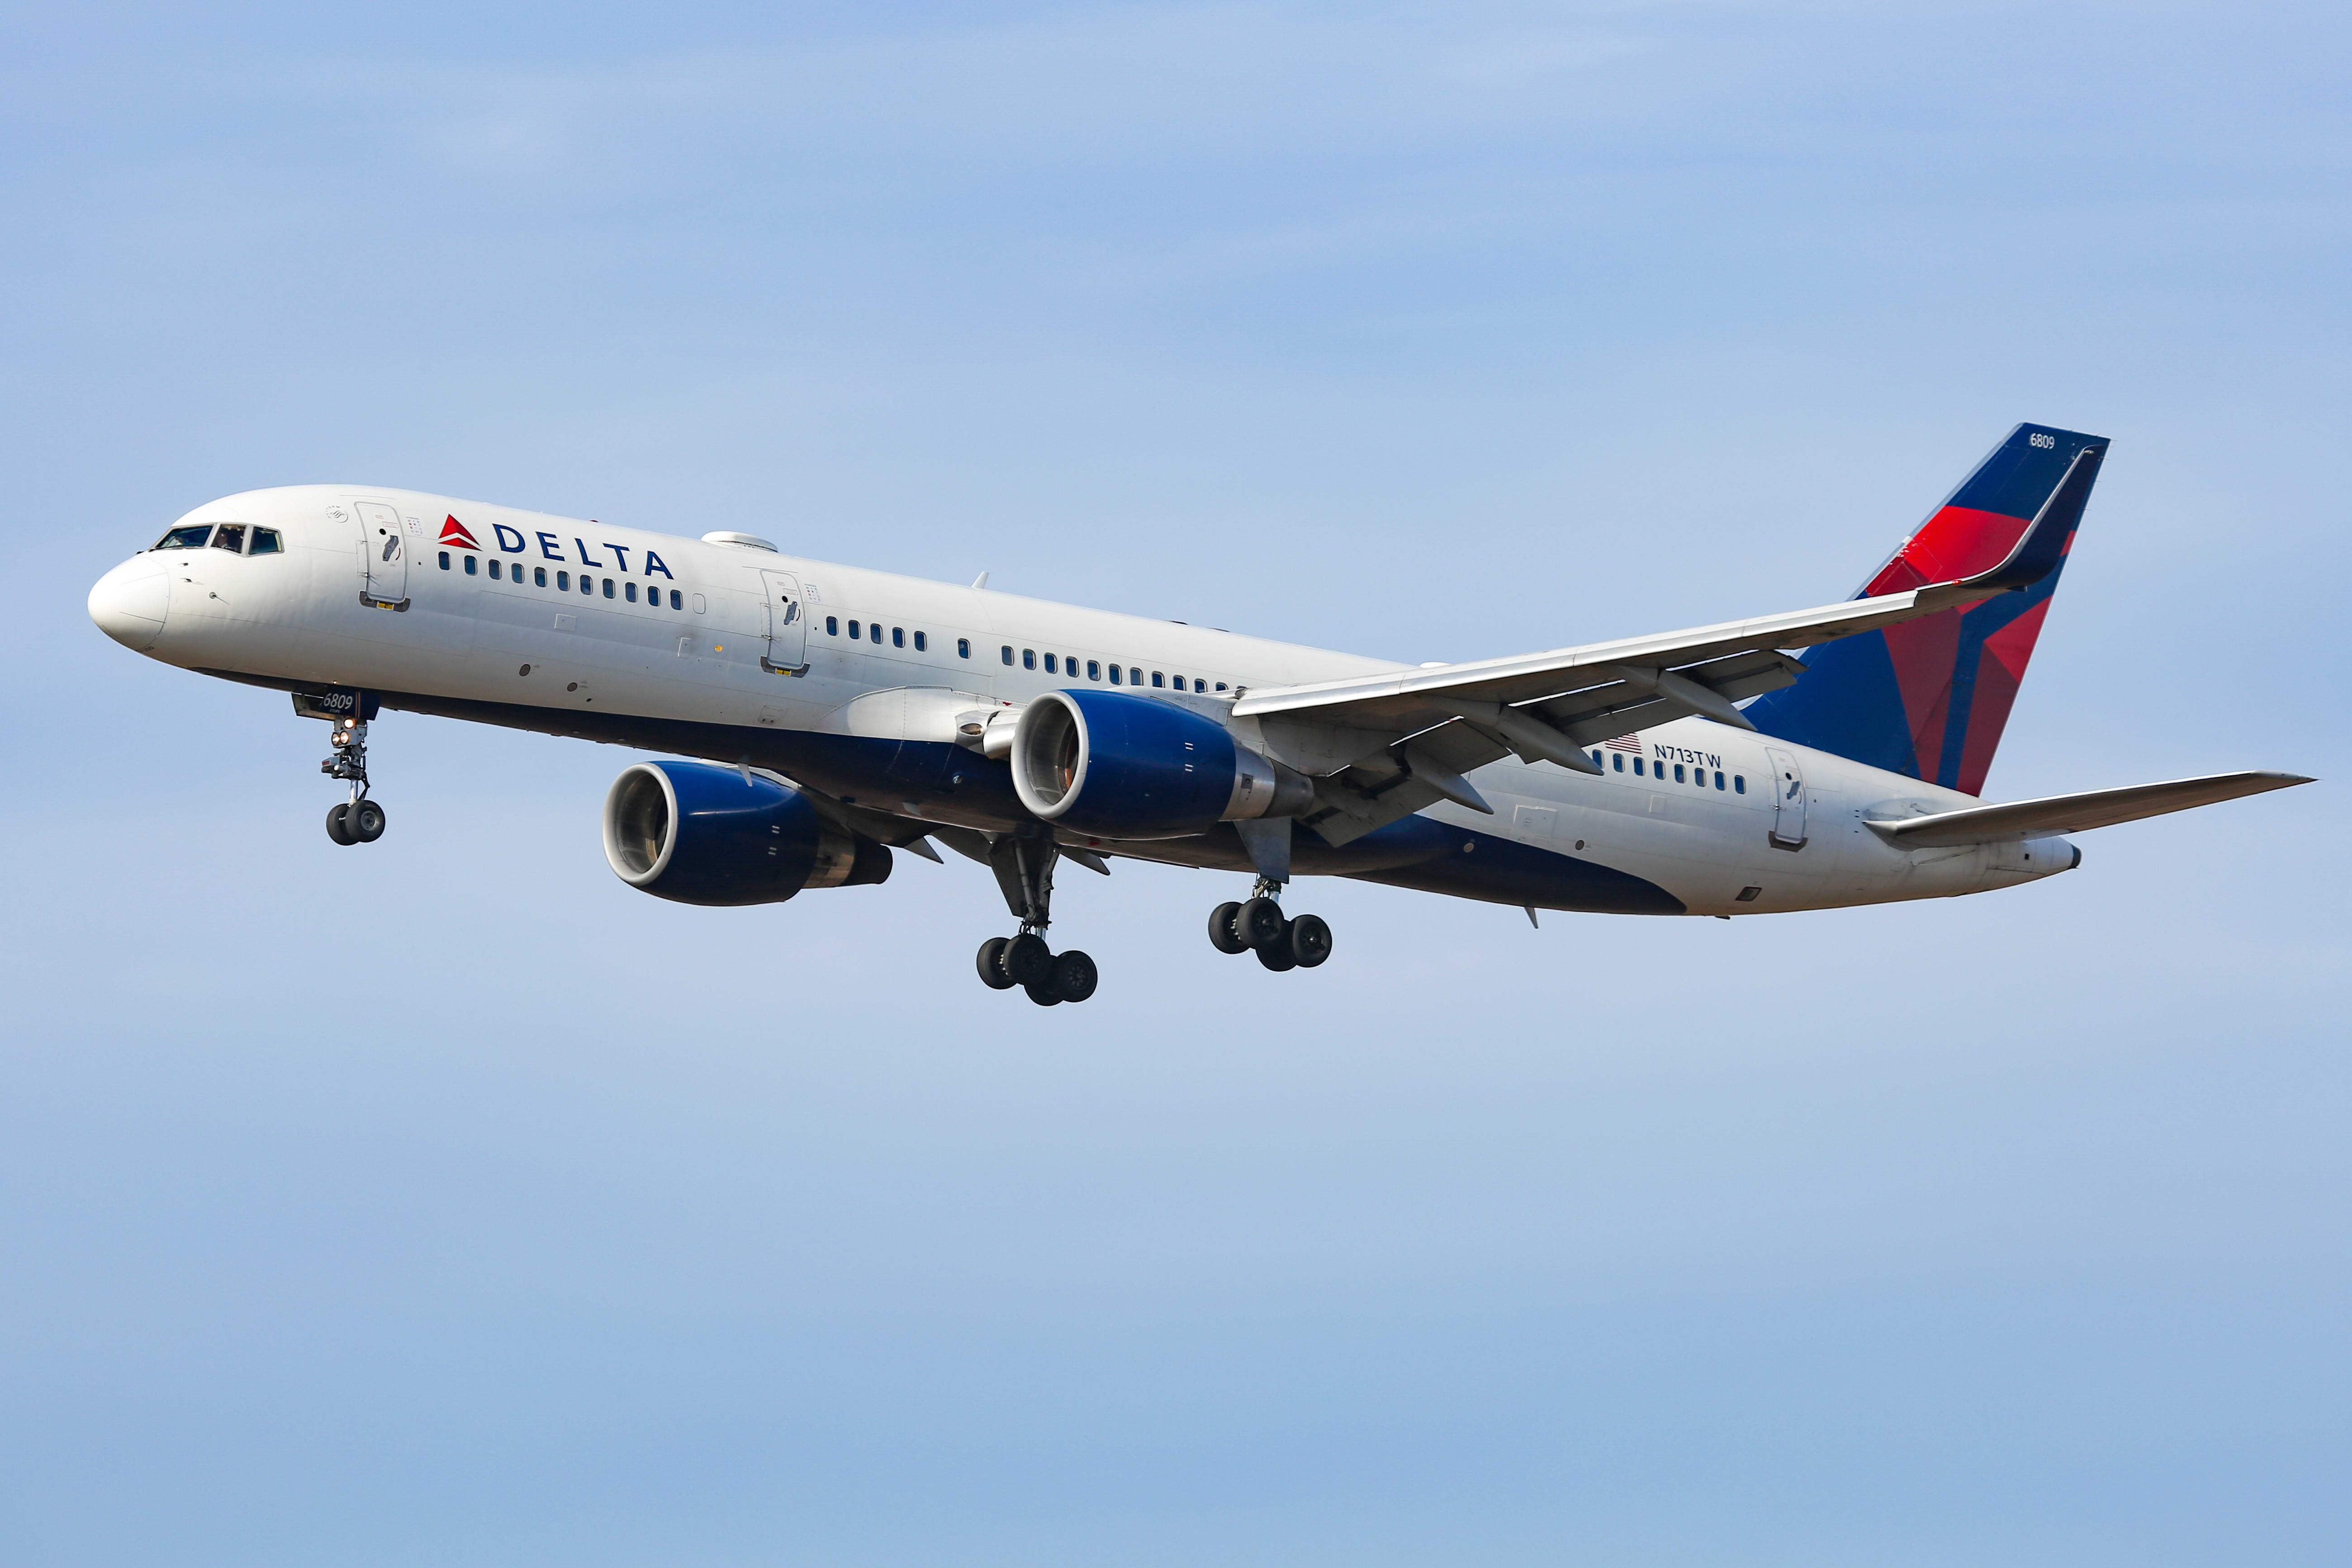 Delta distributes bonuses to drivers whose wages have been reduced in the pandemic